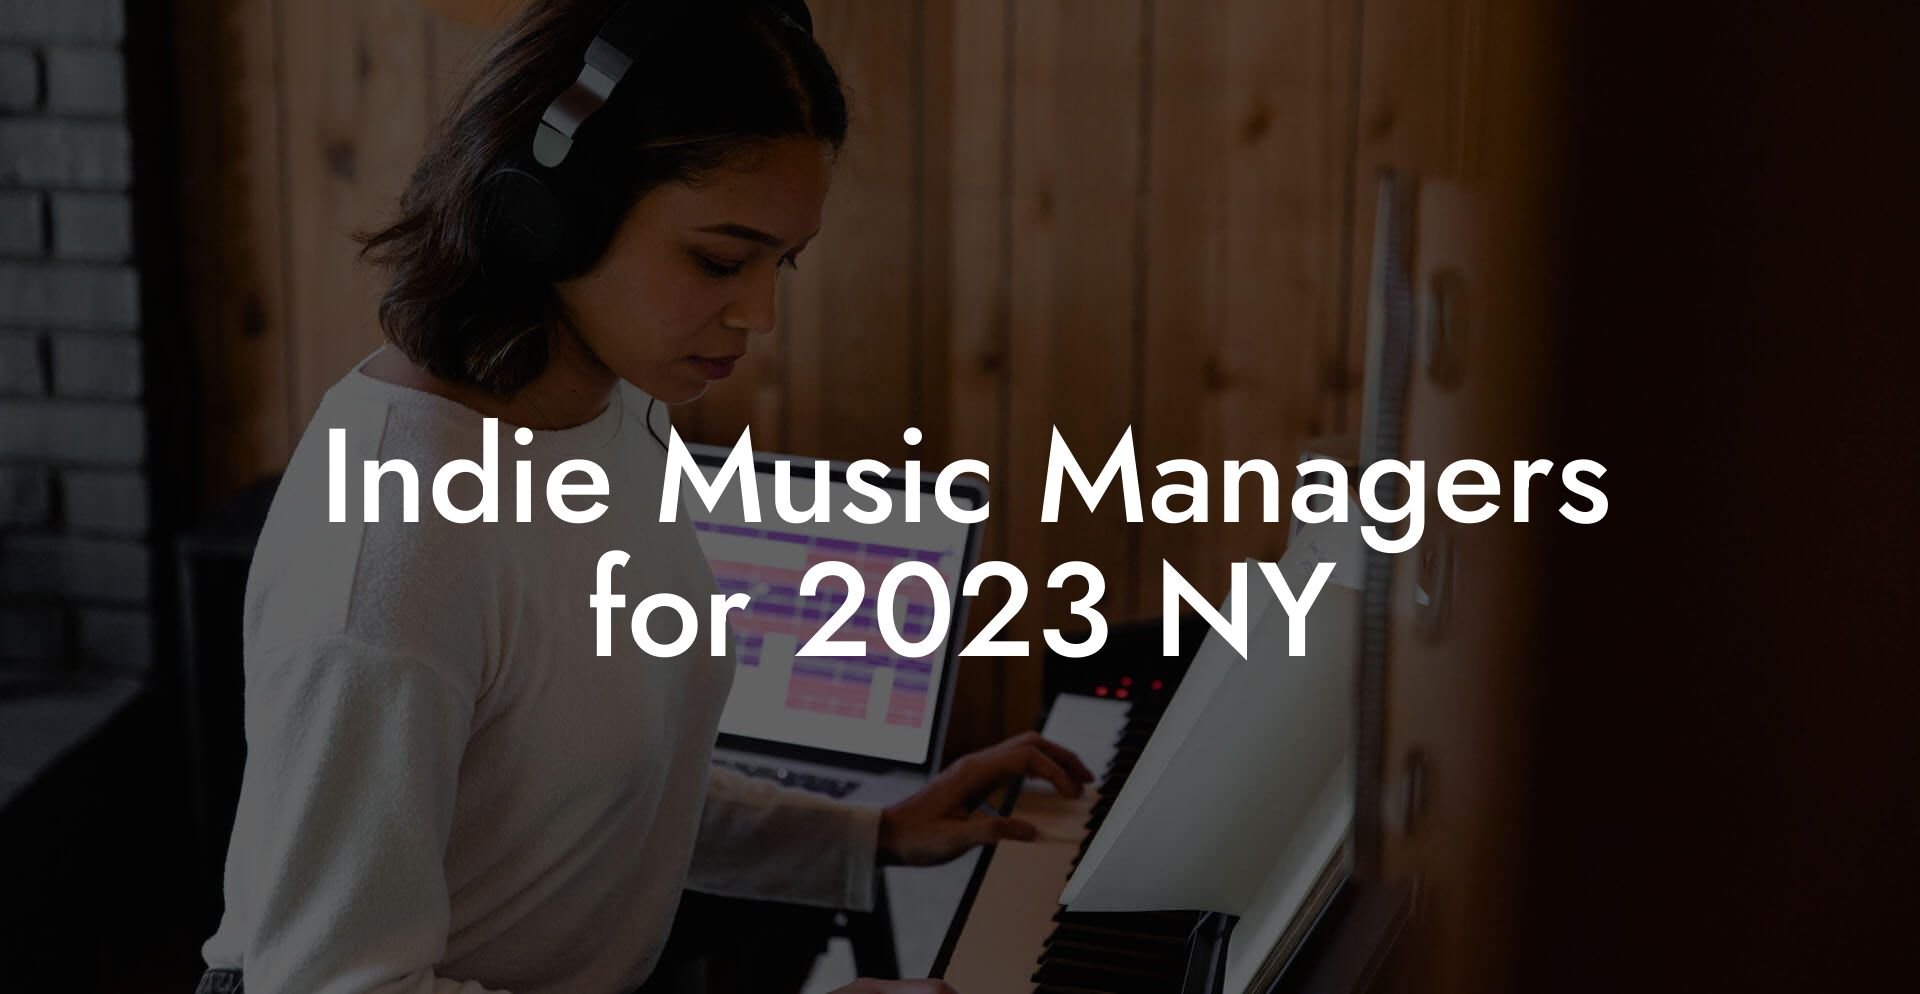 Indie Music Managers for 2023 NY